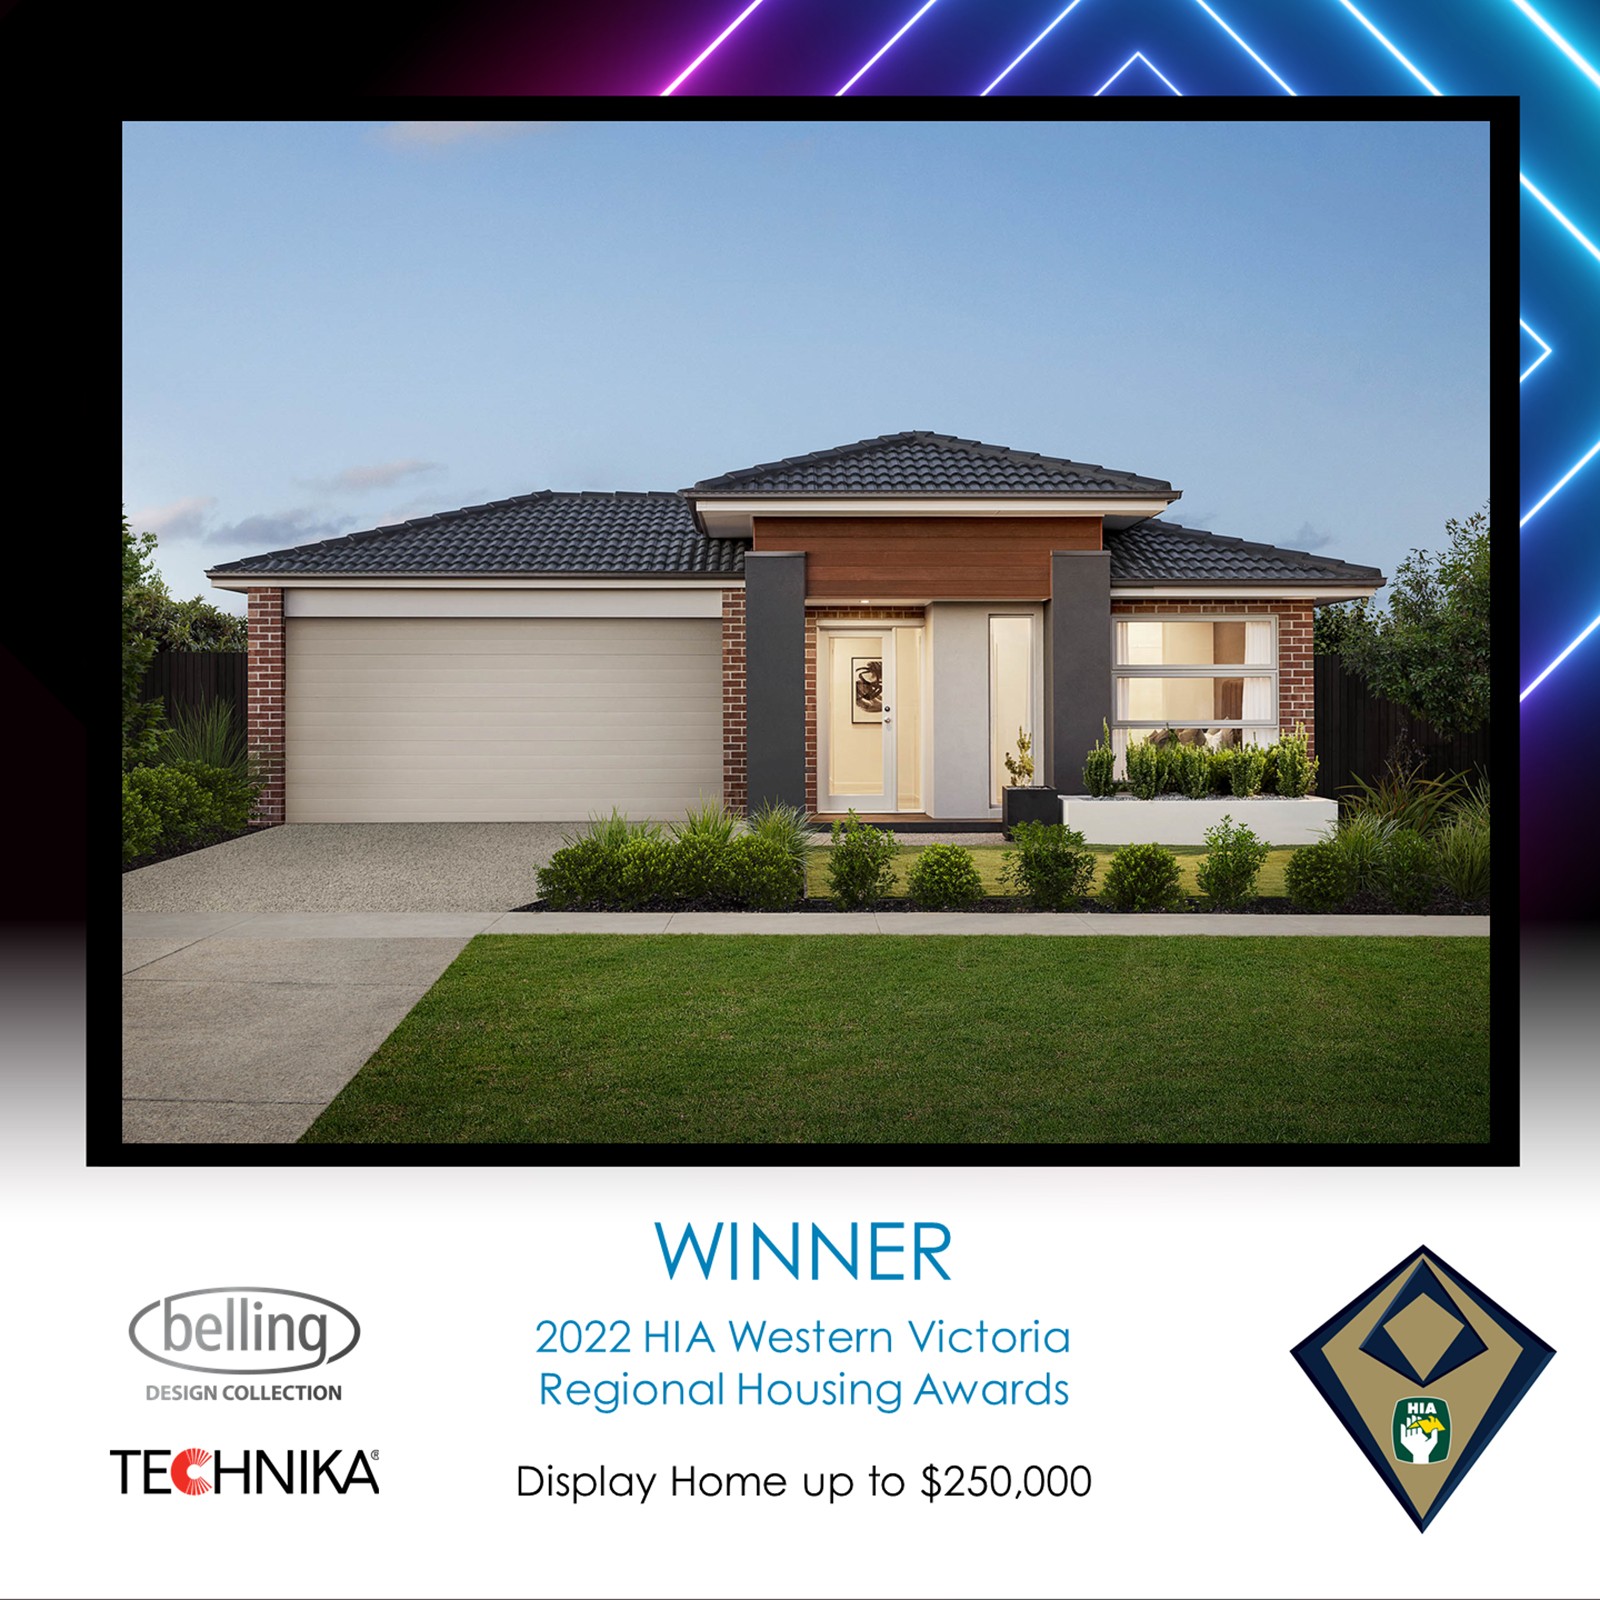 Our Edgewood 23 Display Home Wins Top Prize!